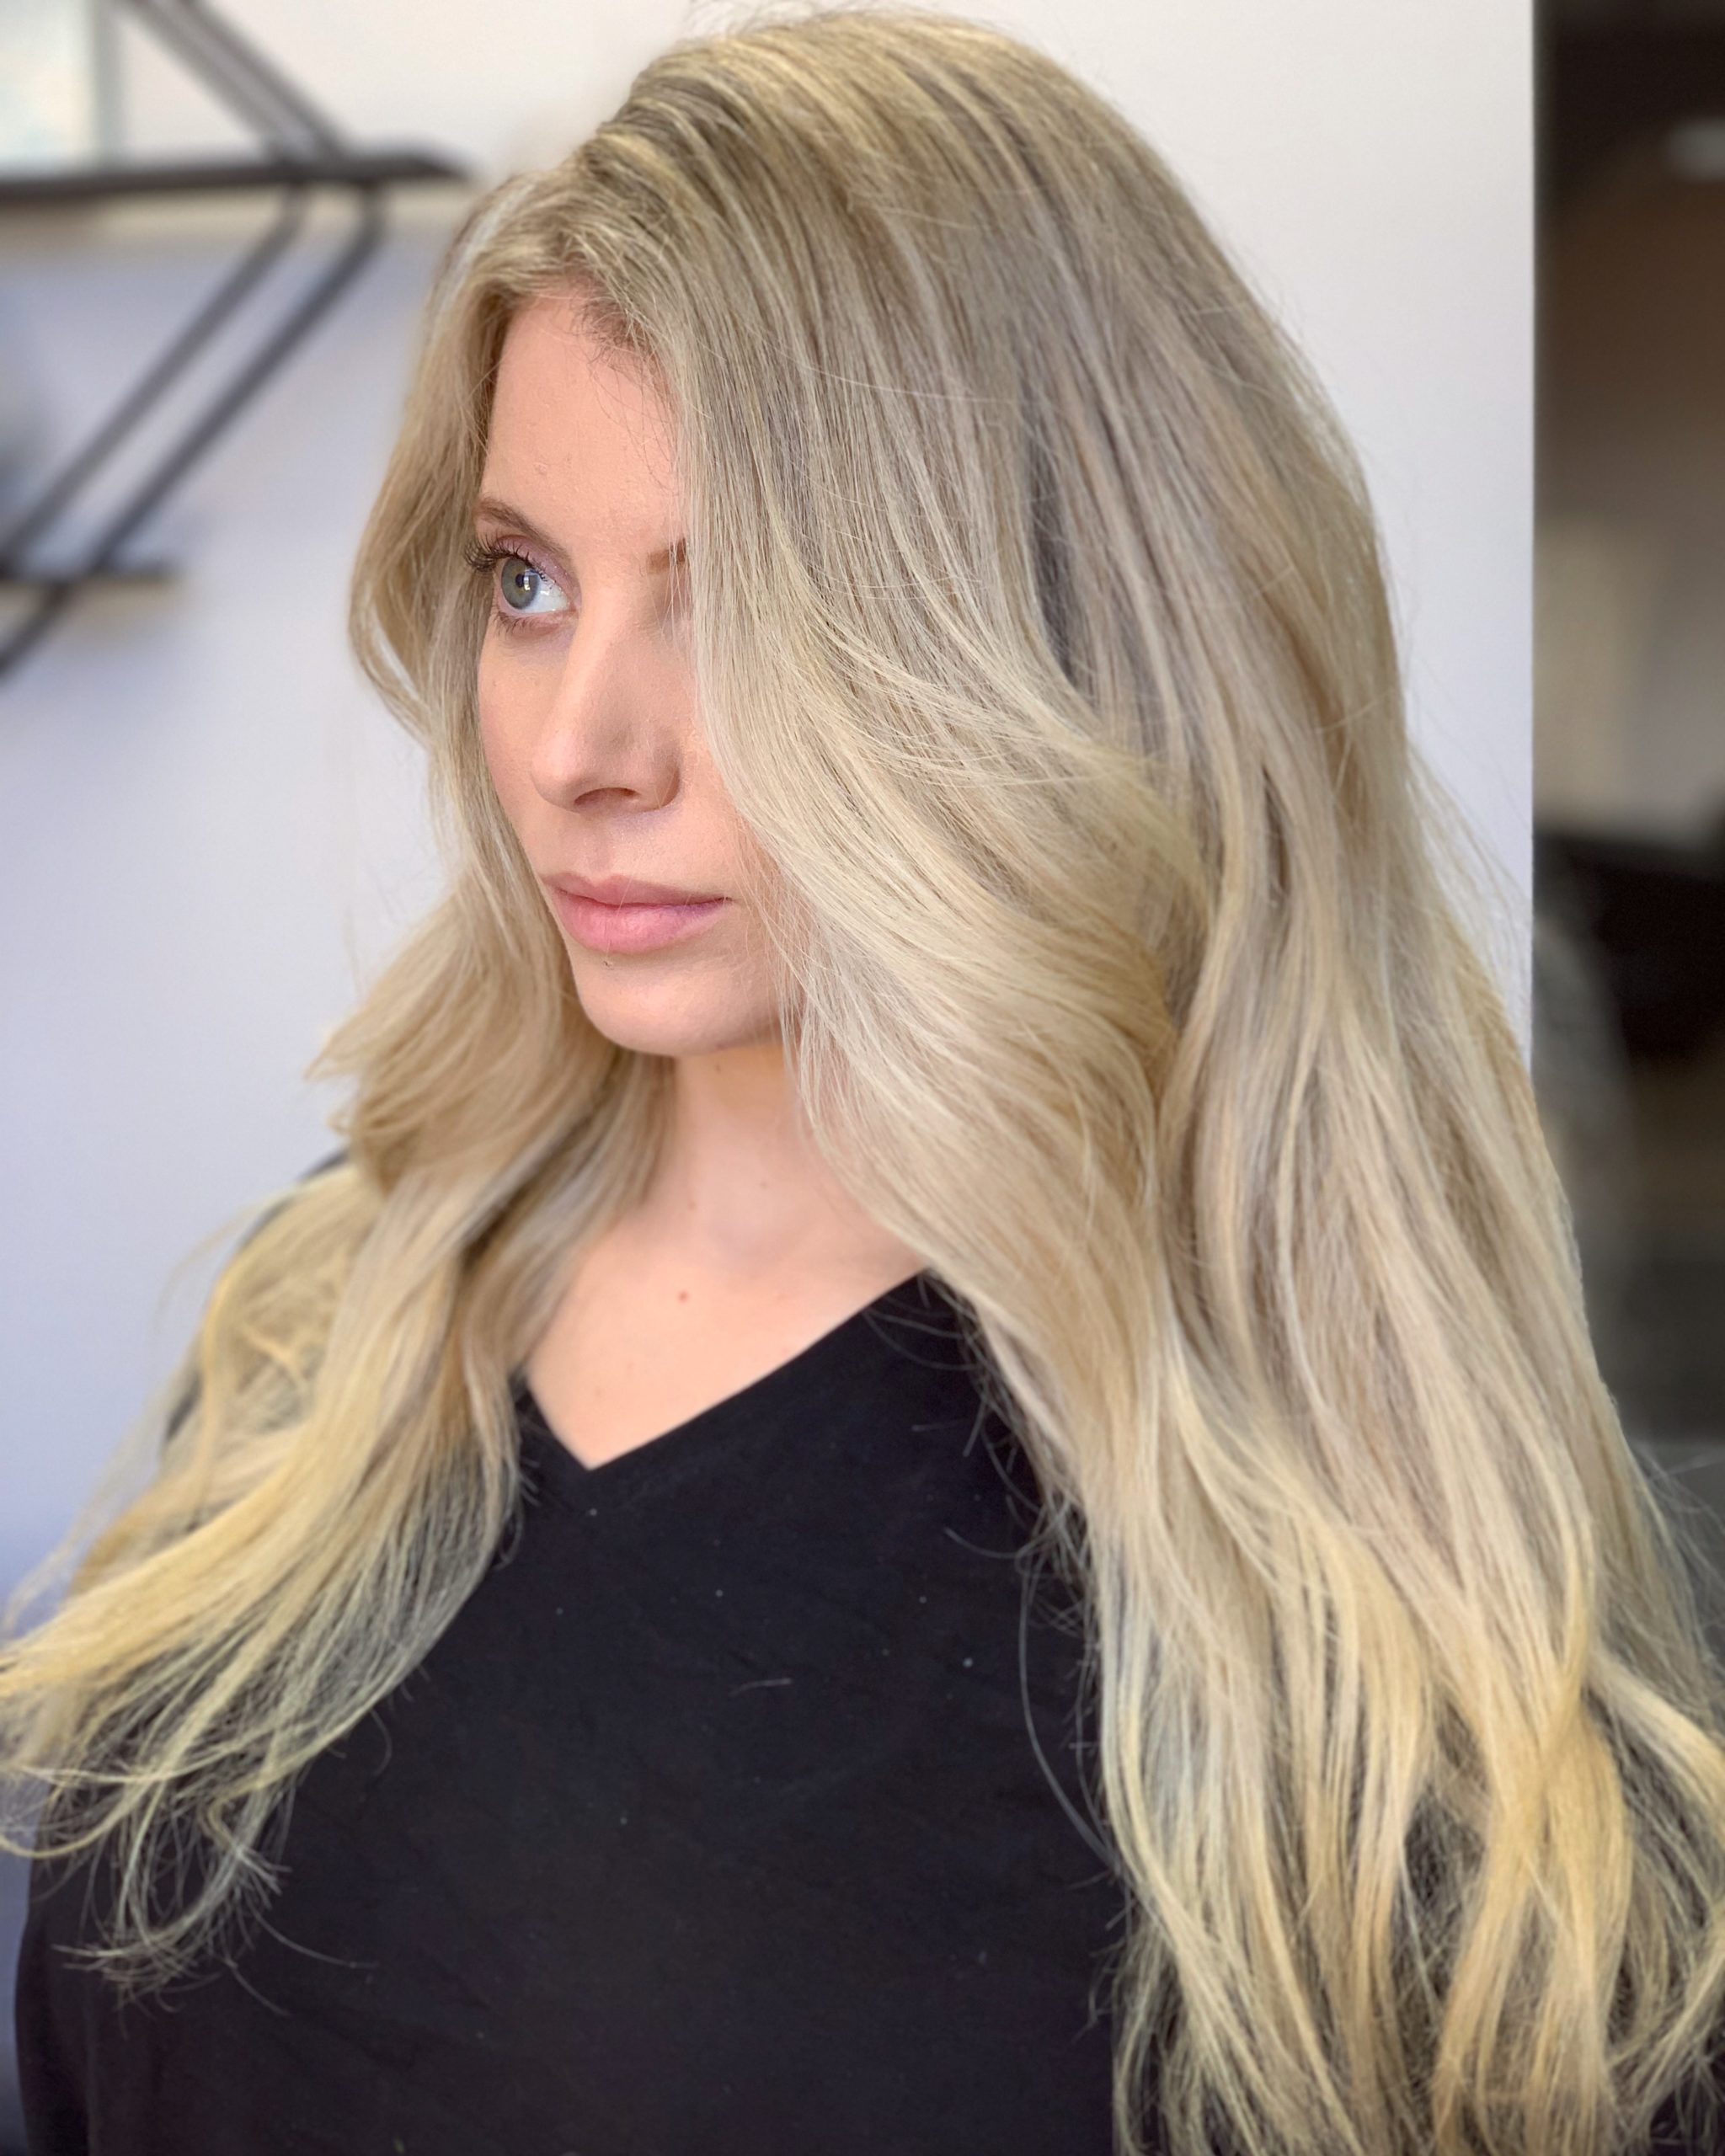 What to Do About Yellow Or Brassy Hair